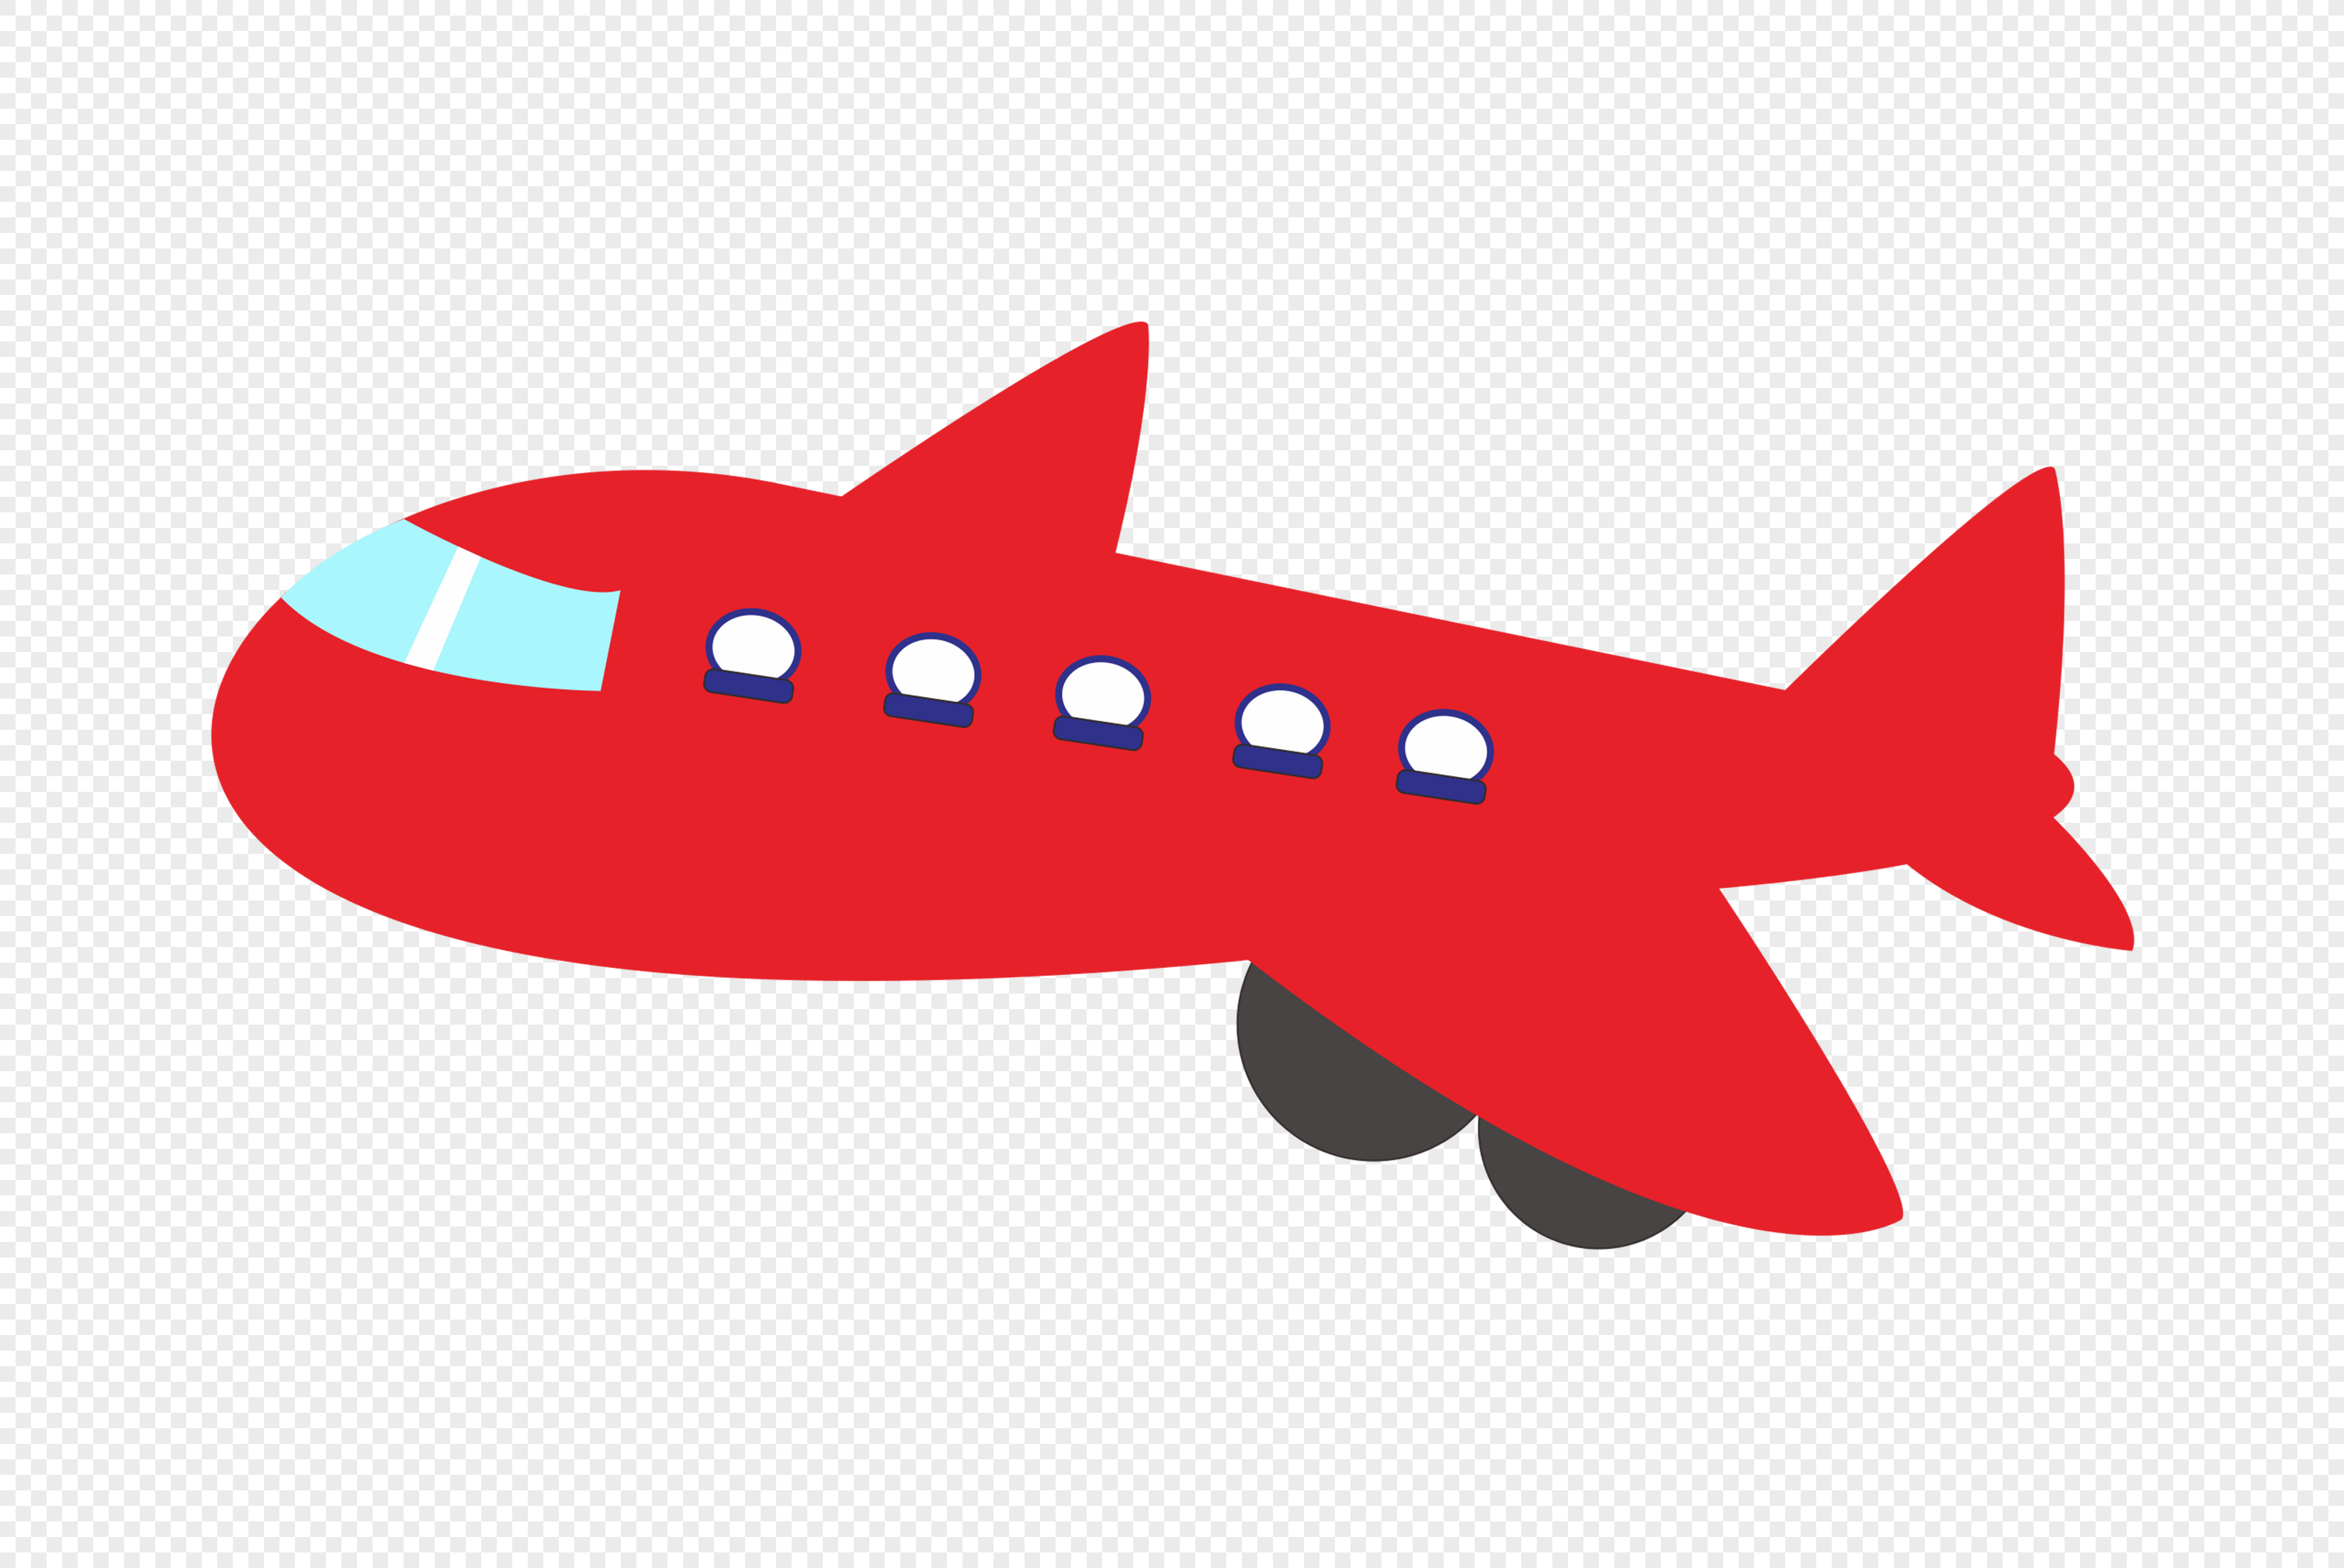 Cartoon Airplane Free PNG And Clipart Image For Free Download - Lovepik |  401092939